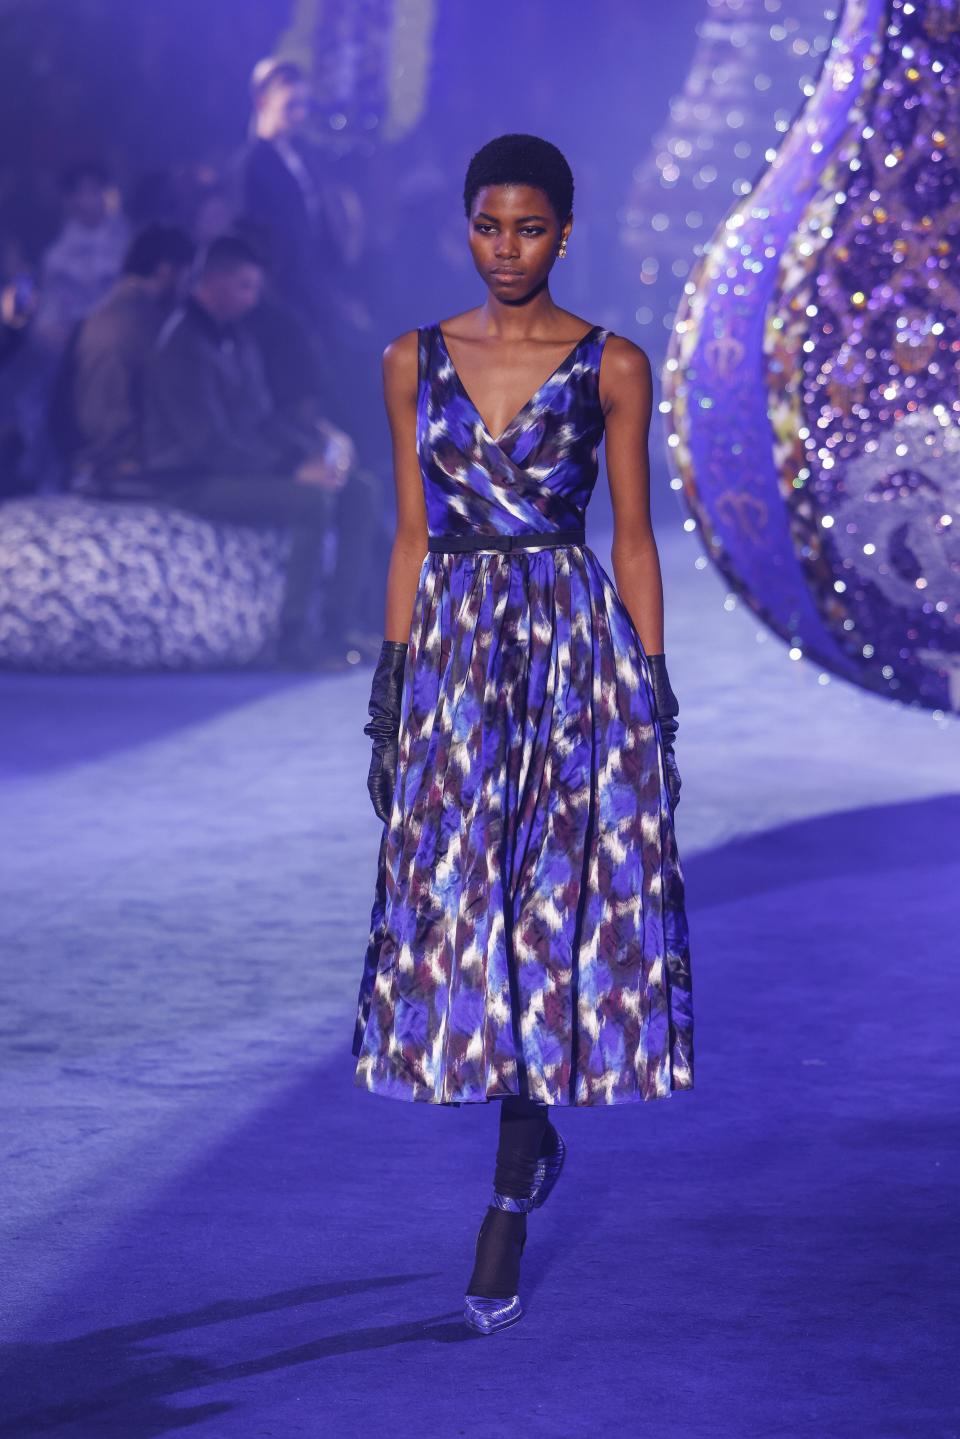 A model wears a creation as part of the Christian Dior Fall/Winter 2023-2024 ready-to-wear collection presented Tuesday, Feb. 28, 2023 in Paris. (Vianney Le Caer/Invision/AP)